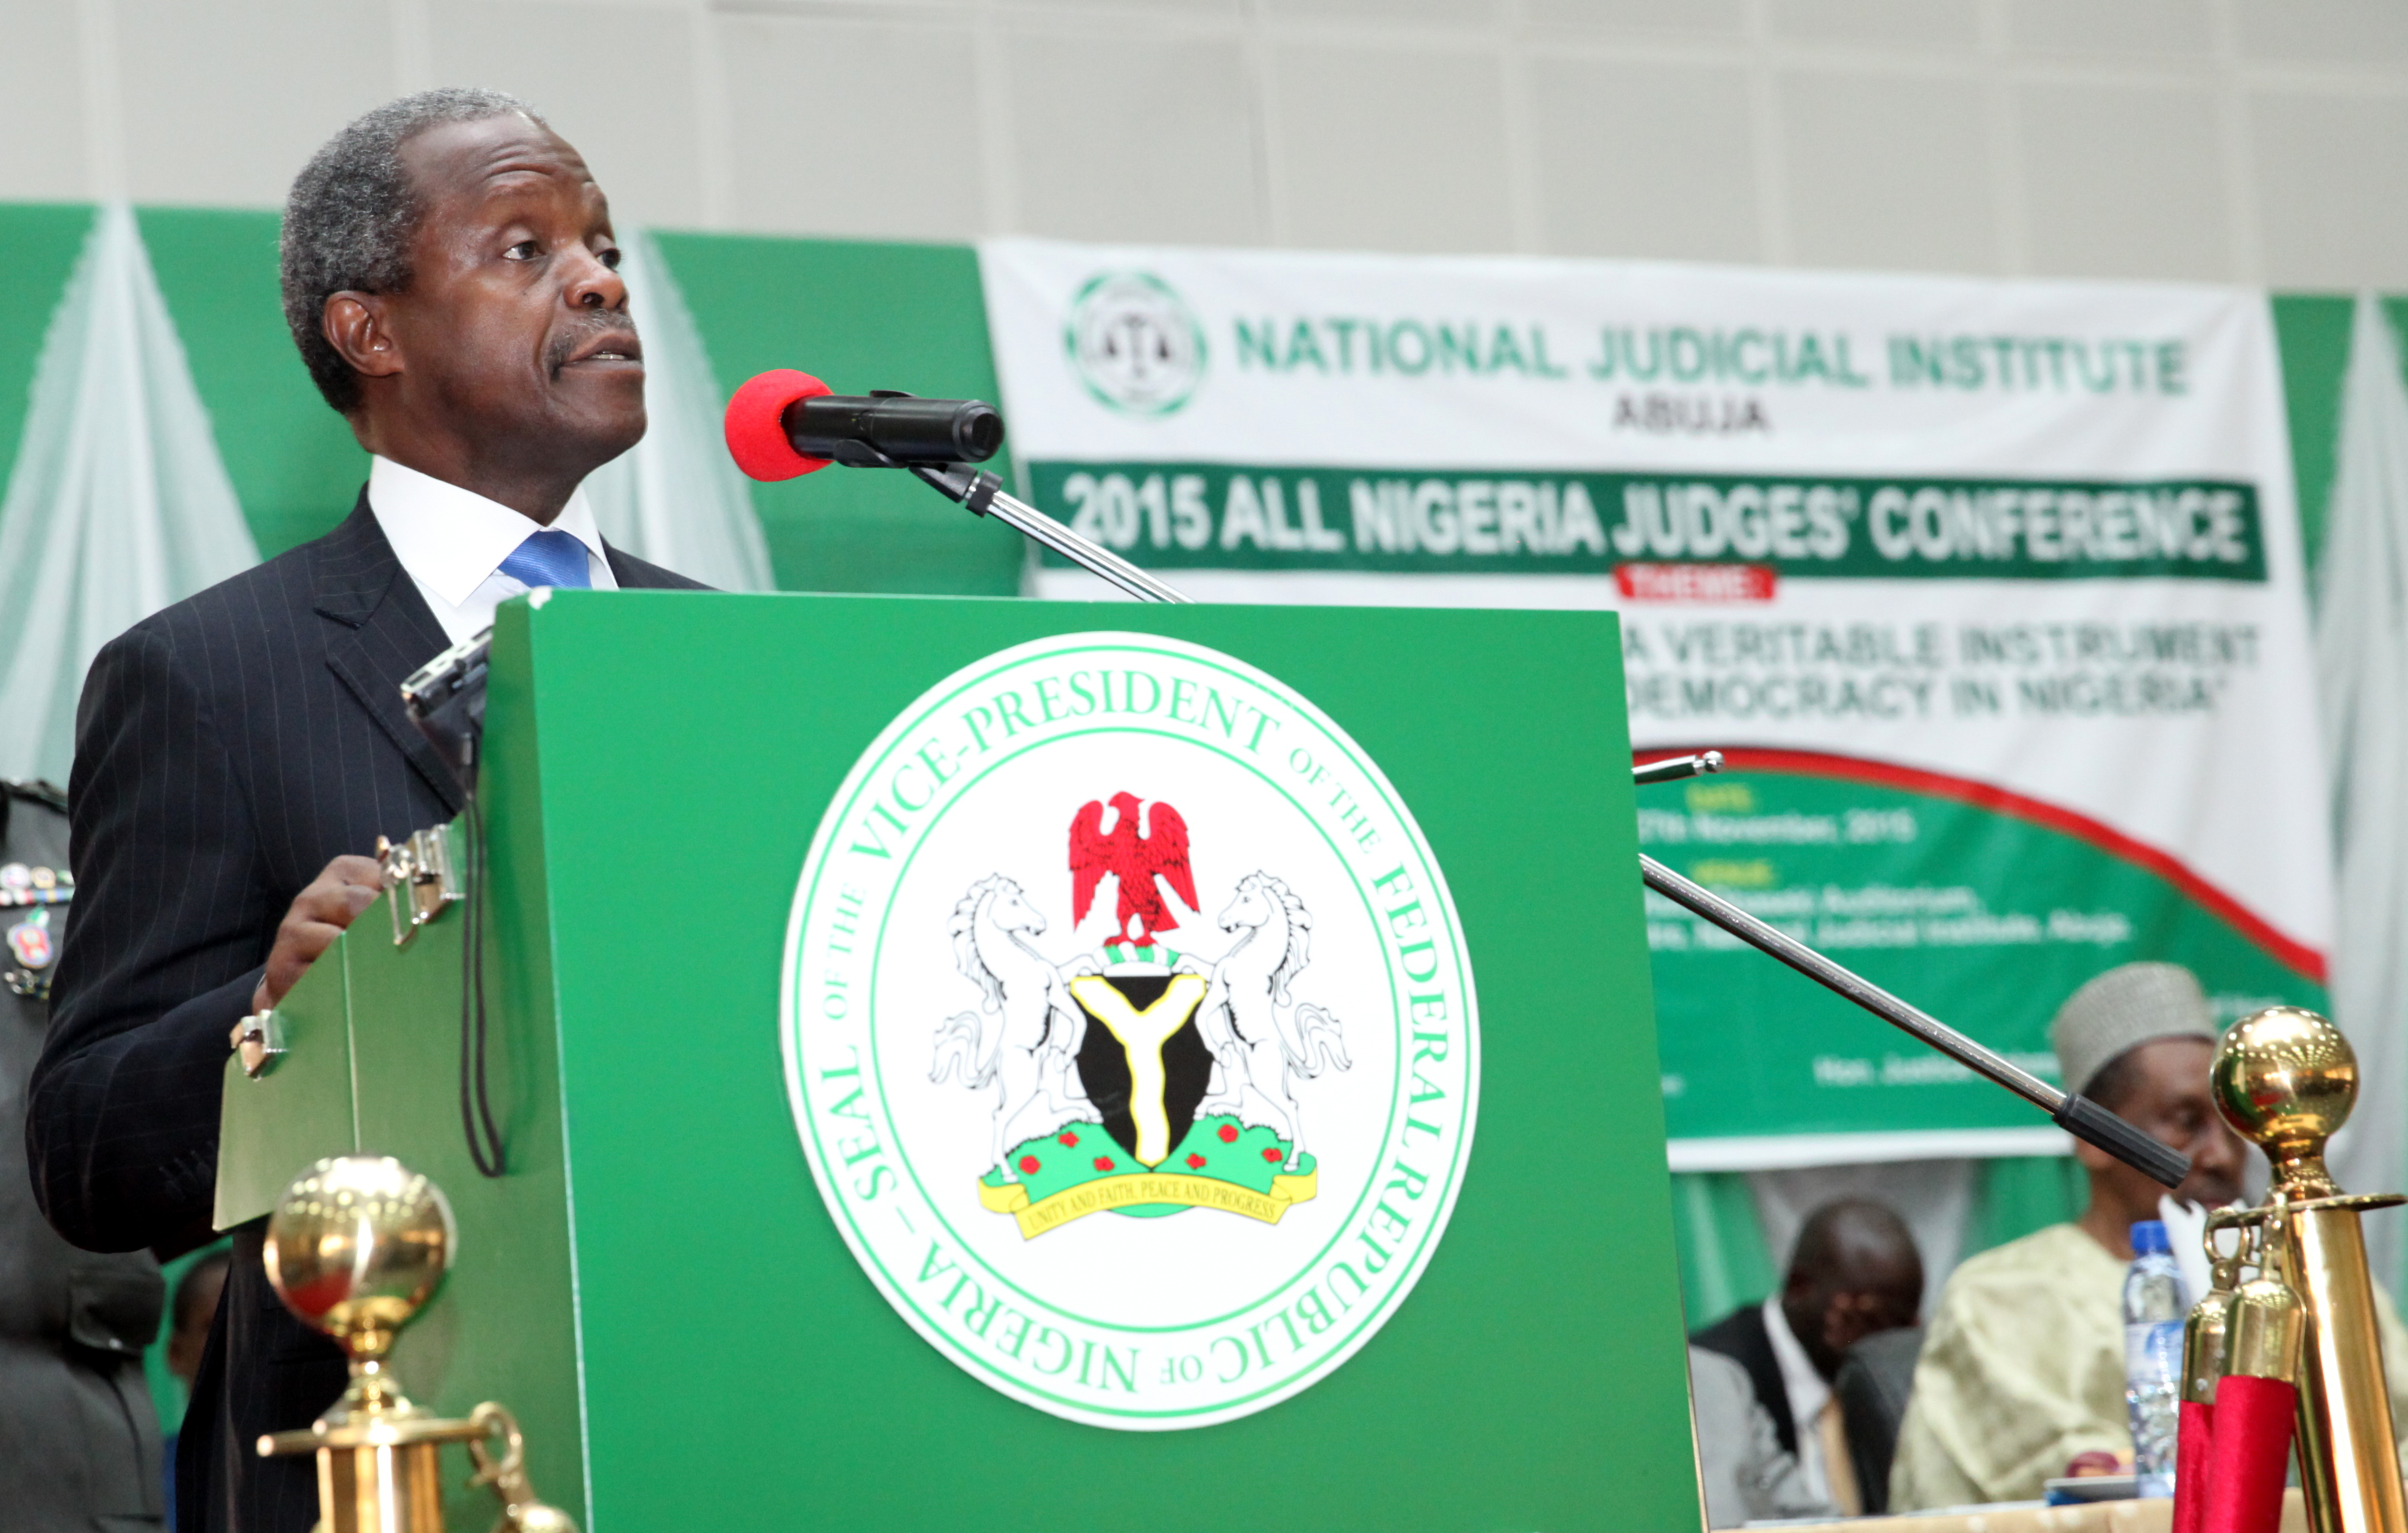 VP Osinbajo At the 2015 All Nigeria Judges’ Conference On 23/11/2015